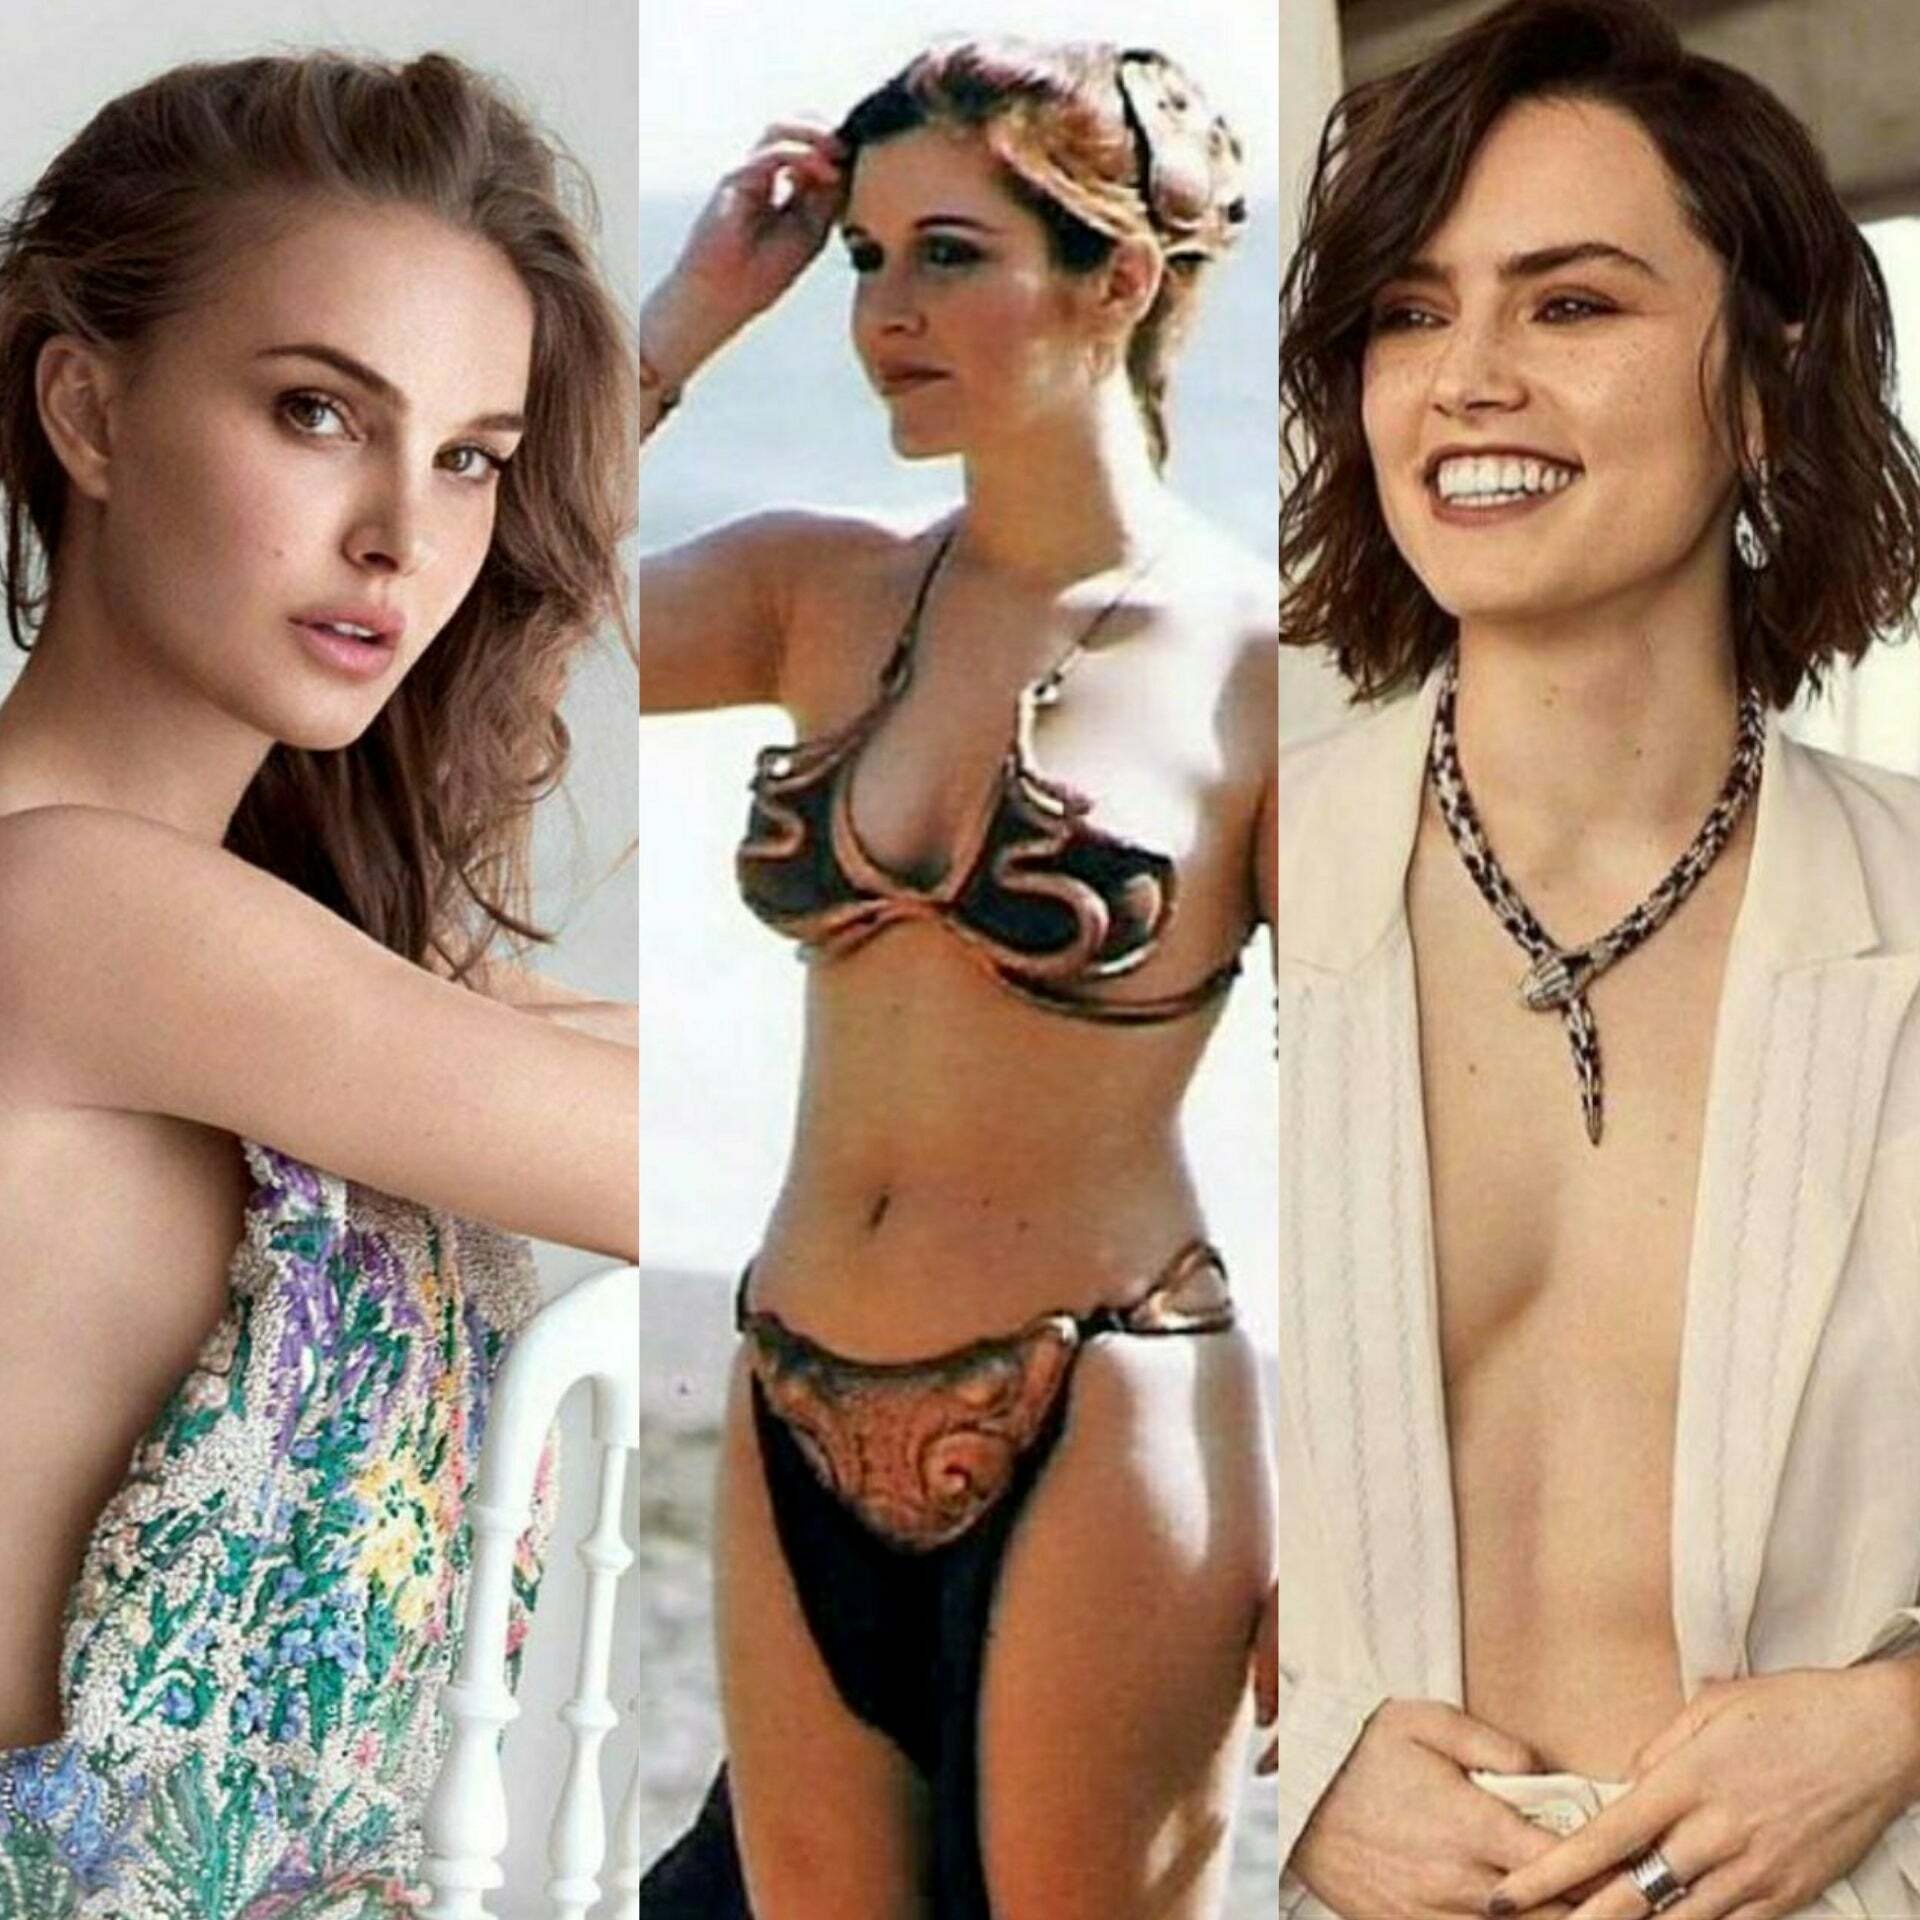 Anyone for the women of star wars? (Natalie Portman, Carrie Fisher, Daisy Ridley)